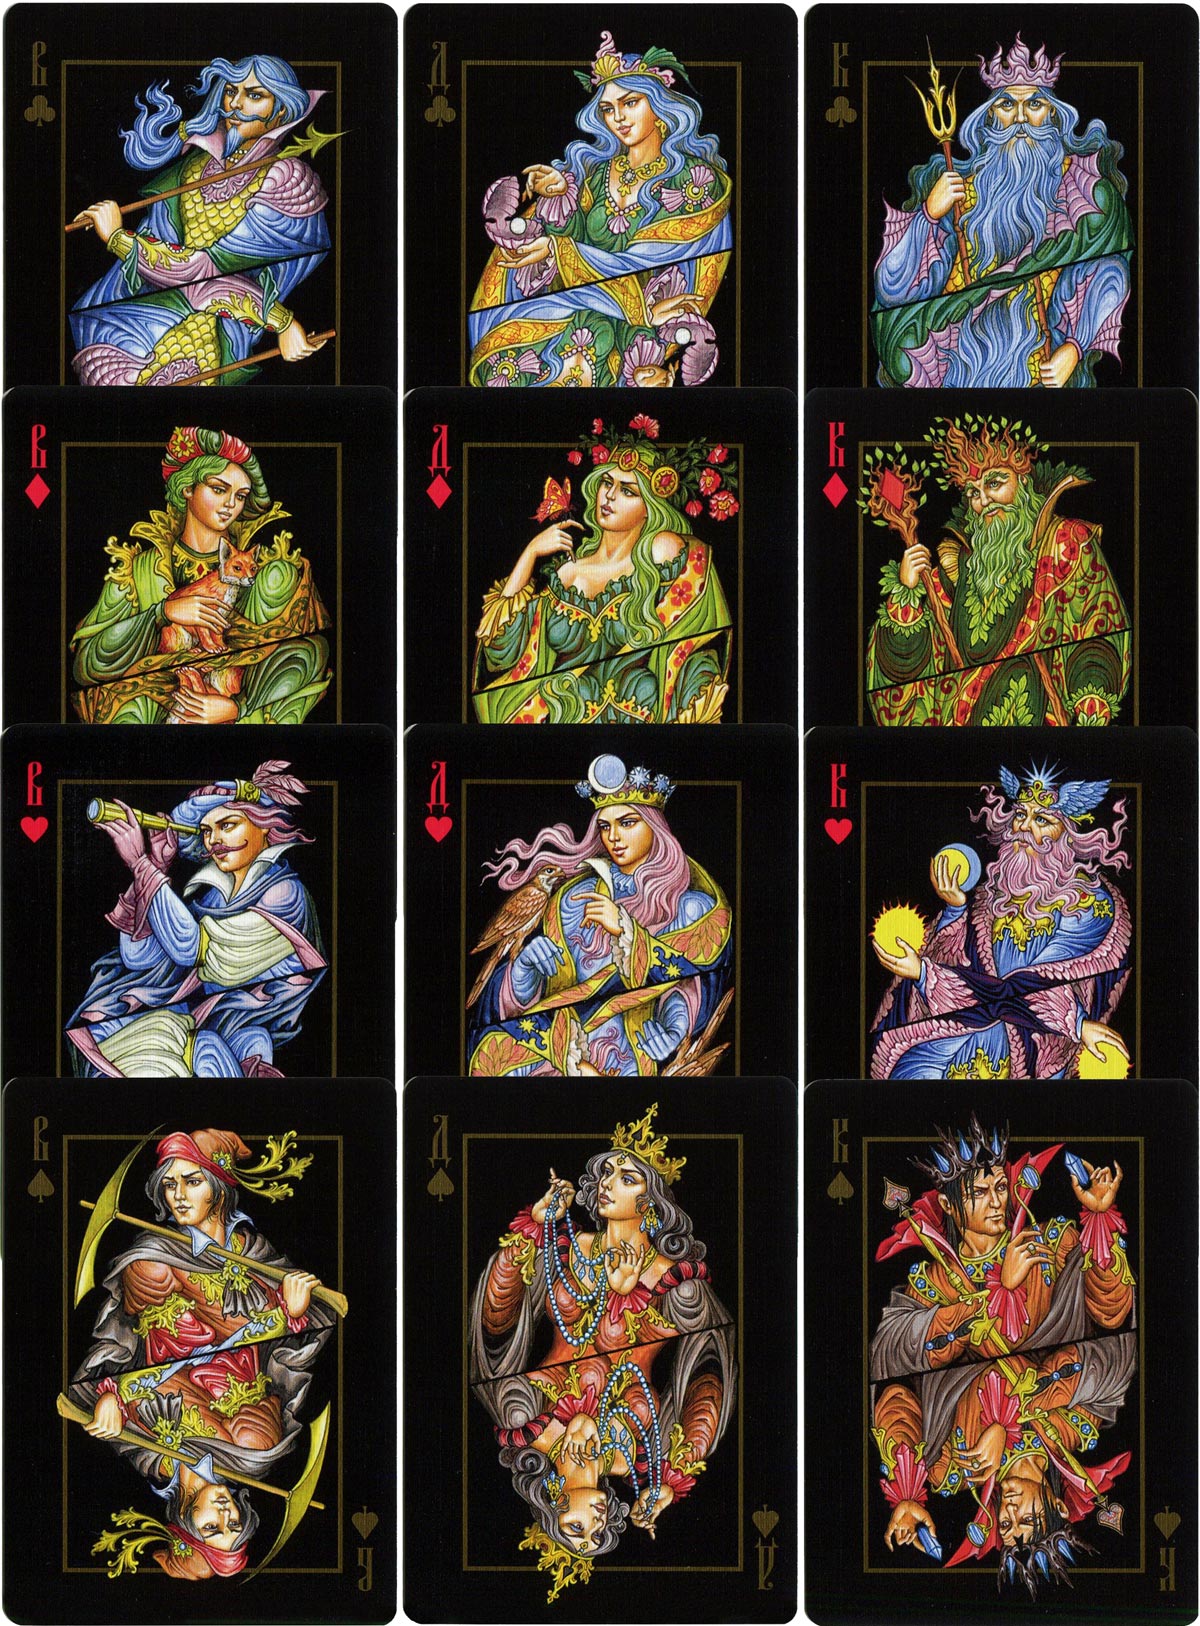 The Four Worlds playing cards by artist Aleksey Zhiryakov, 2018